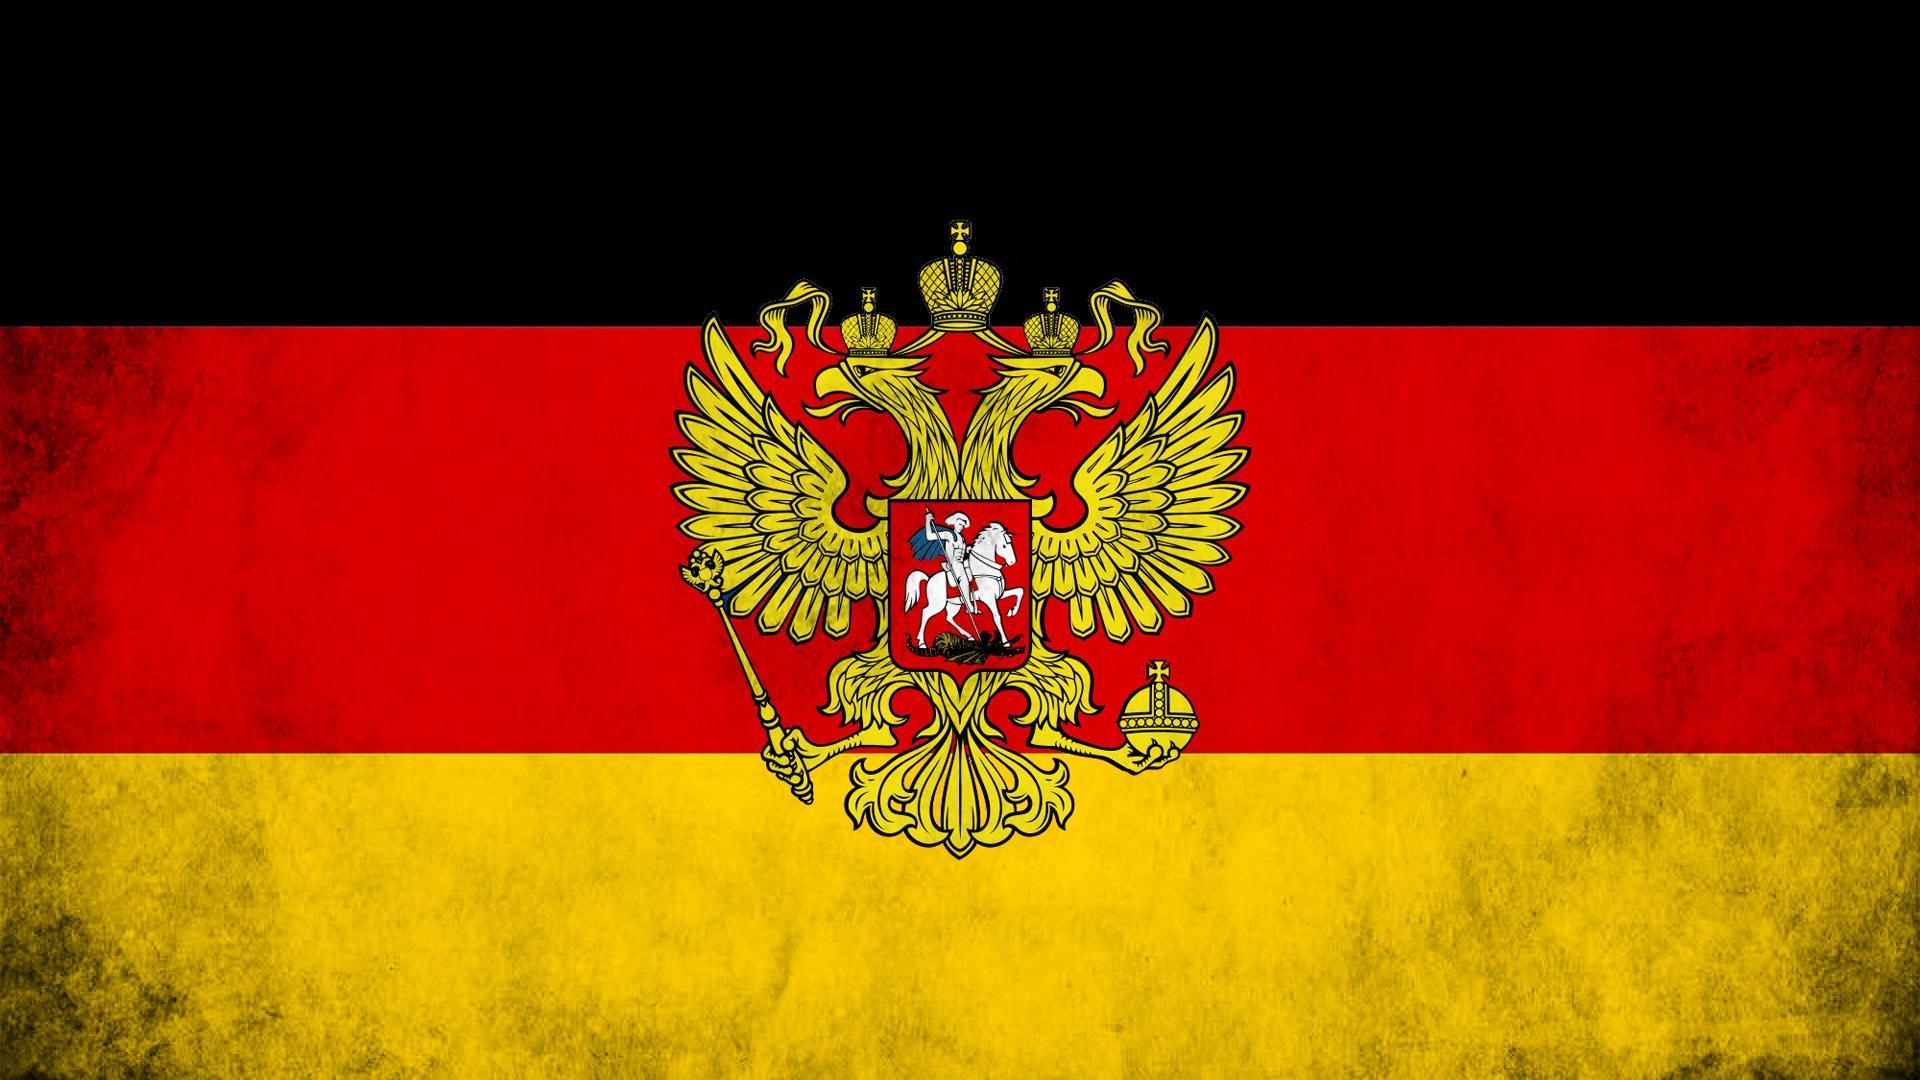 German Eagle Wallpapers Top Free German Eagle Backgrounds Images, Photos, Reviews